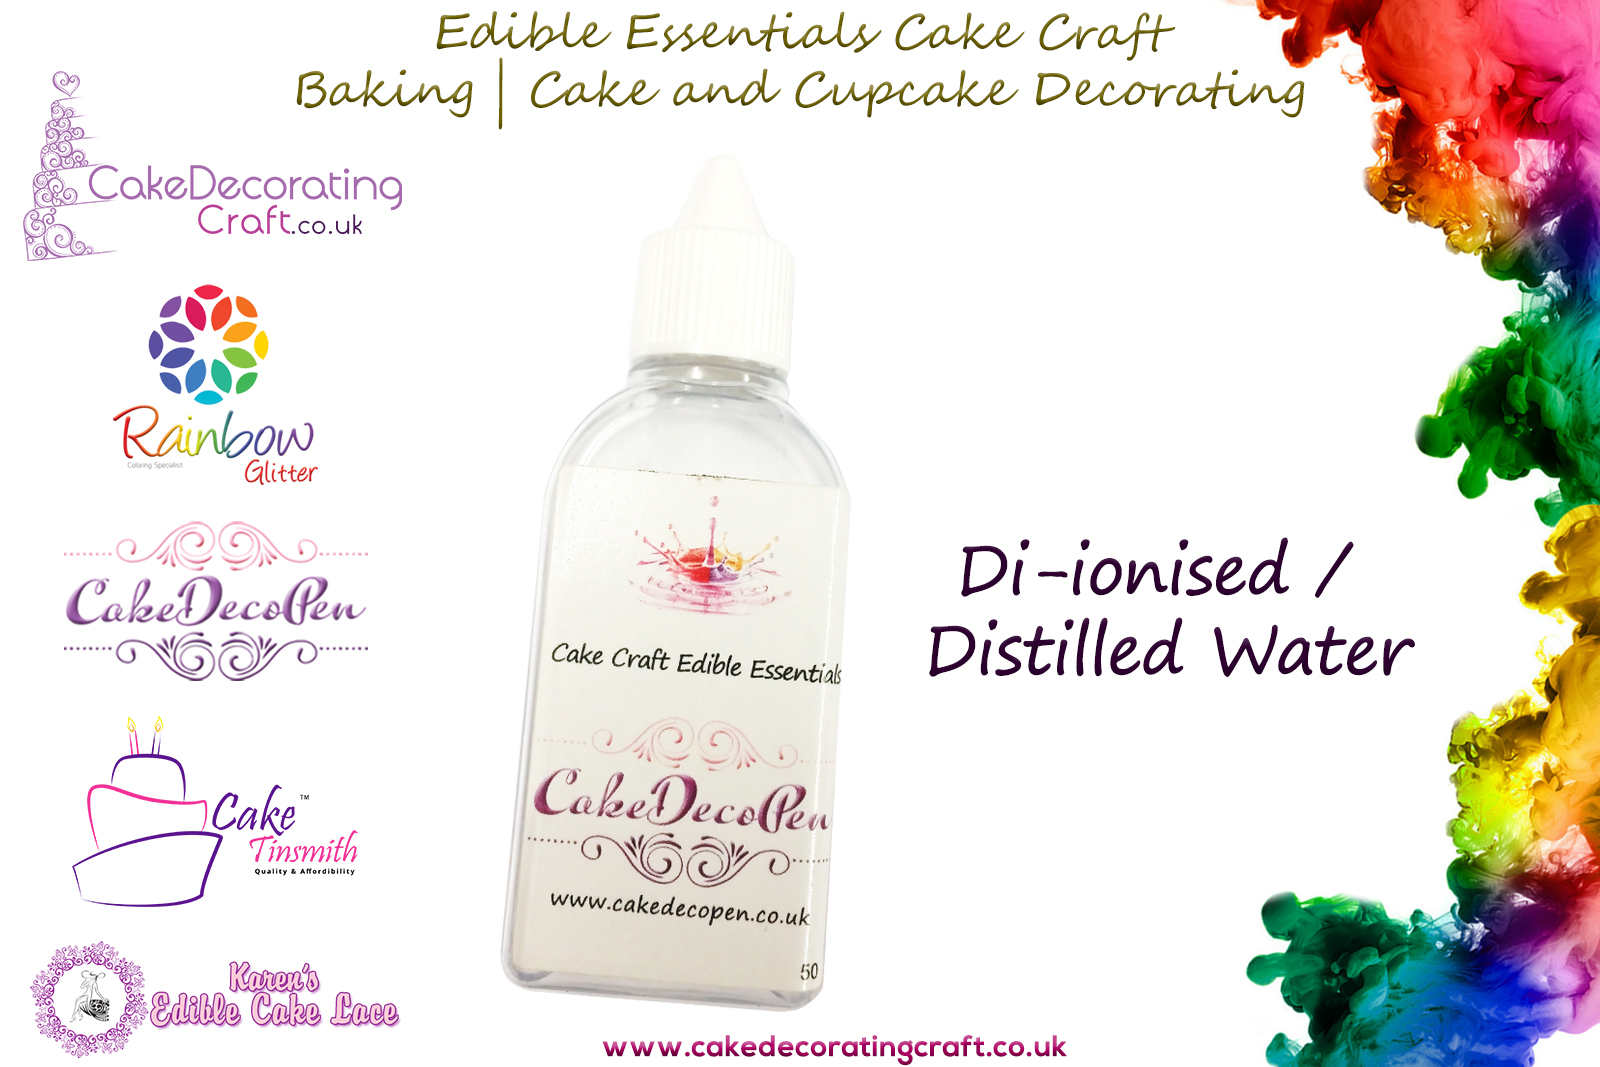 Di-ionised/Distilled Water | 50 ml | Edible Essentials Baking and Cake Decorating Craft